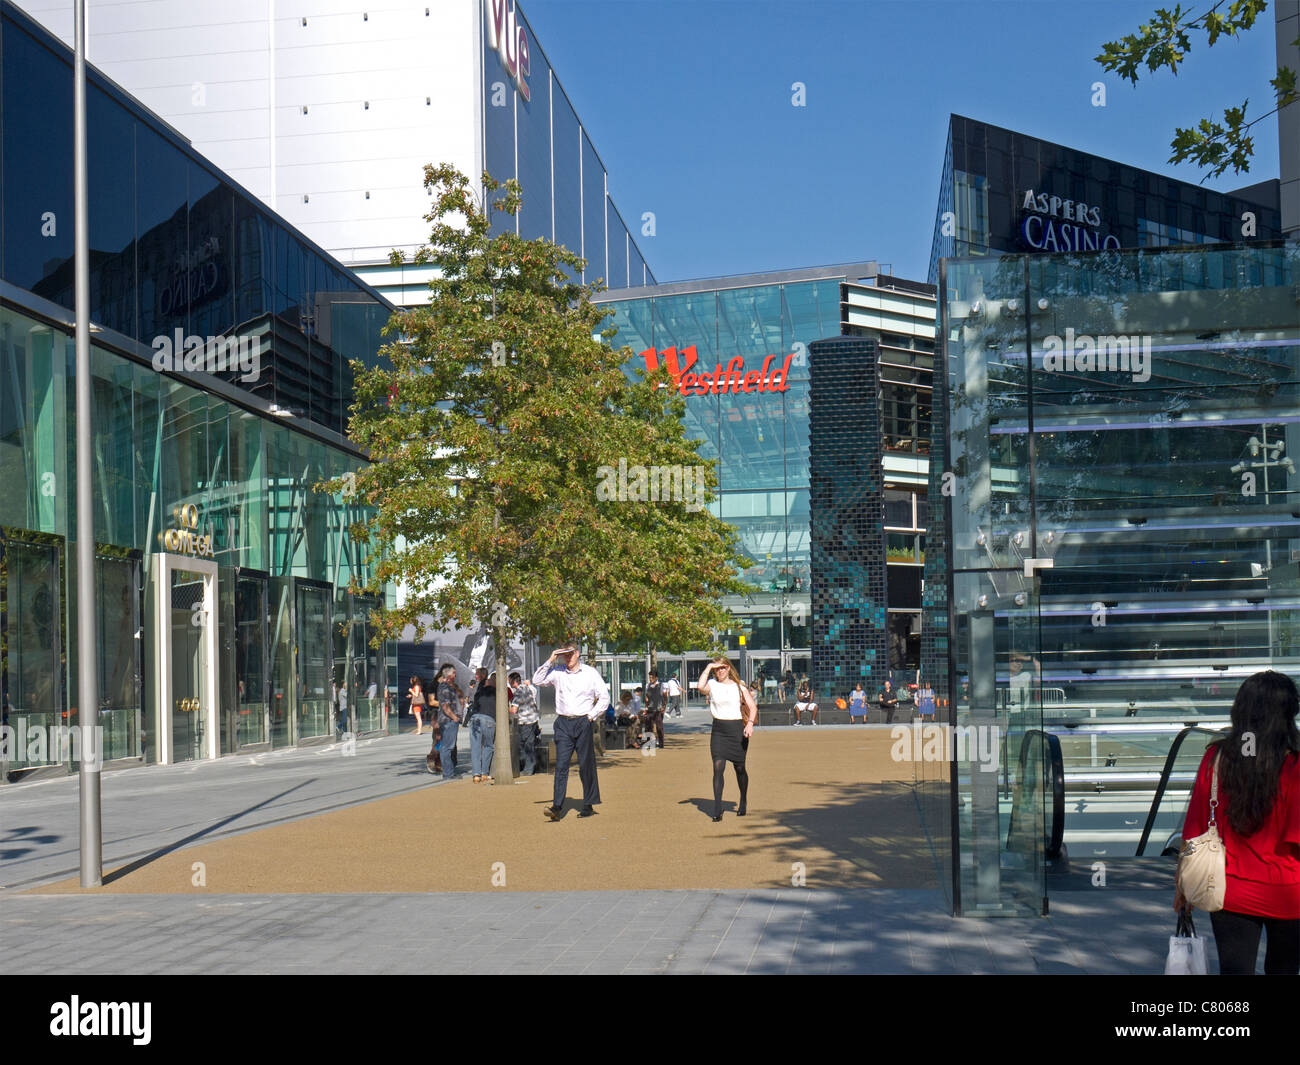 Stratford City Shopping Mall, Westfield East. Olympic Park E20 Stock Photo